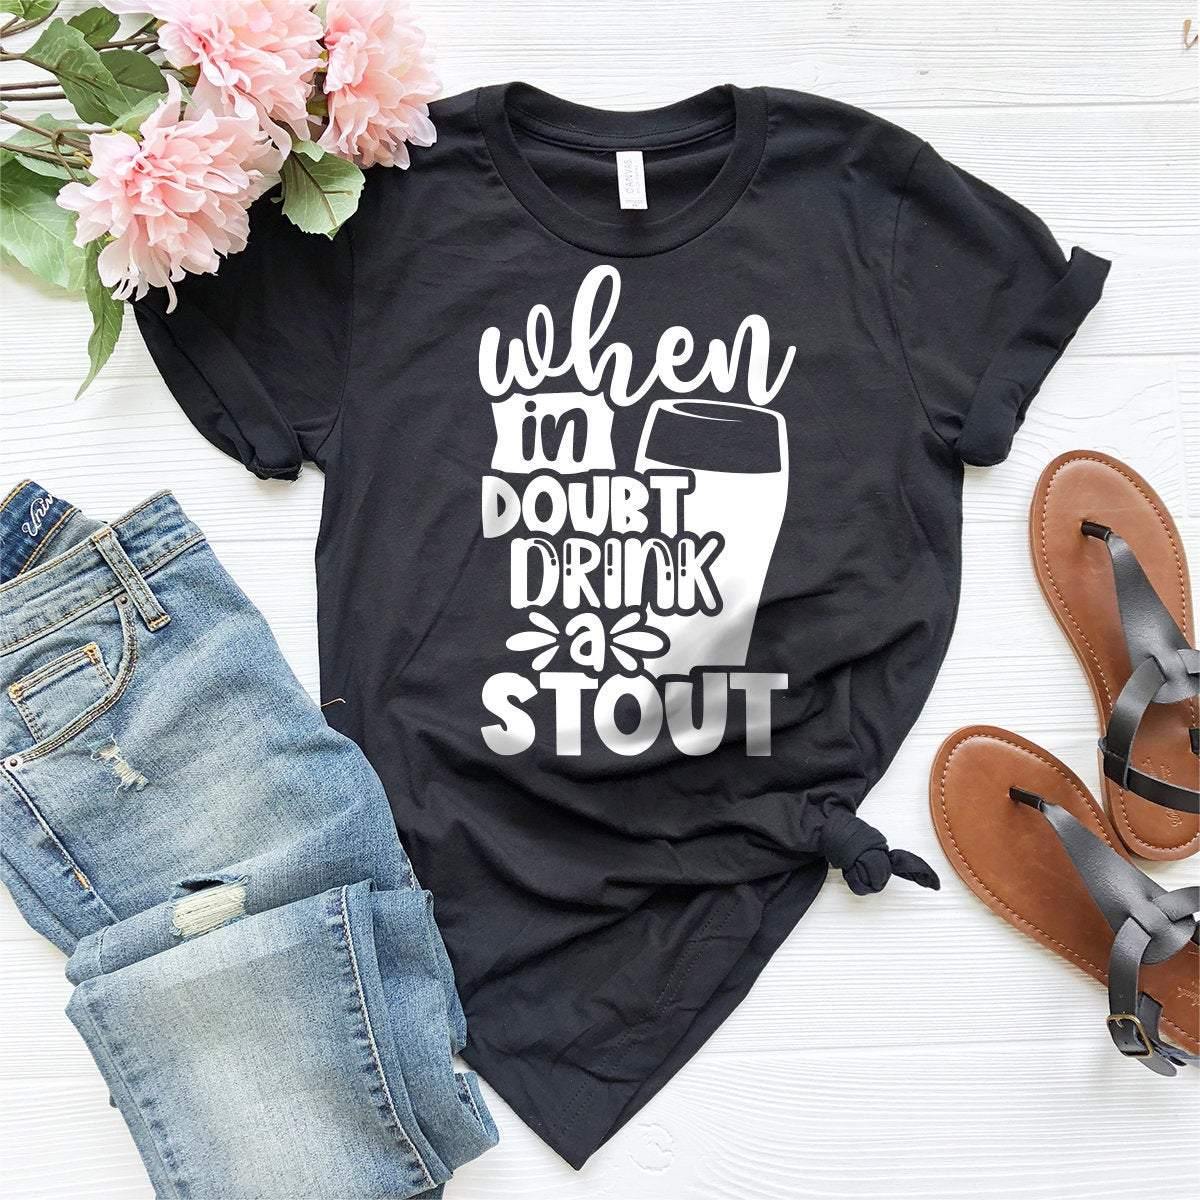 Beer Lover T-Shirt, Beer Drinker Tee, When In Doubt Drink A Stout Shirt, Funny Beer Shirt, Day Drinking Shirt, Concert Shirt, Beer Tee - Fastdeliverytees.com